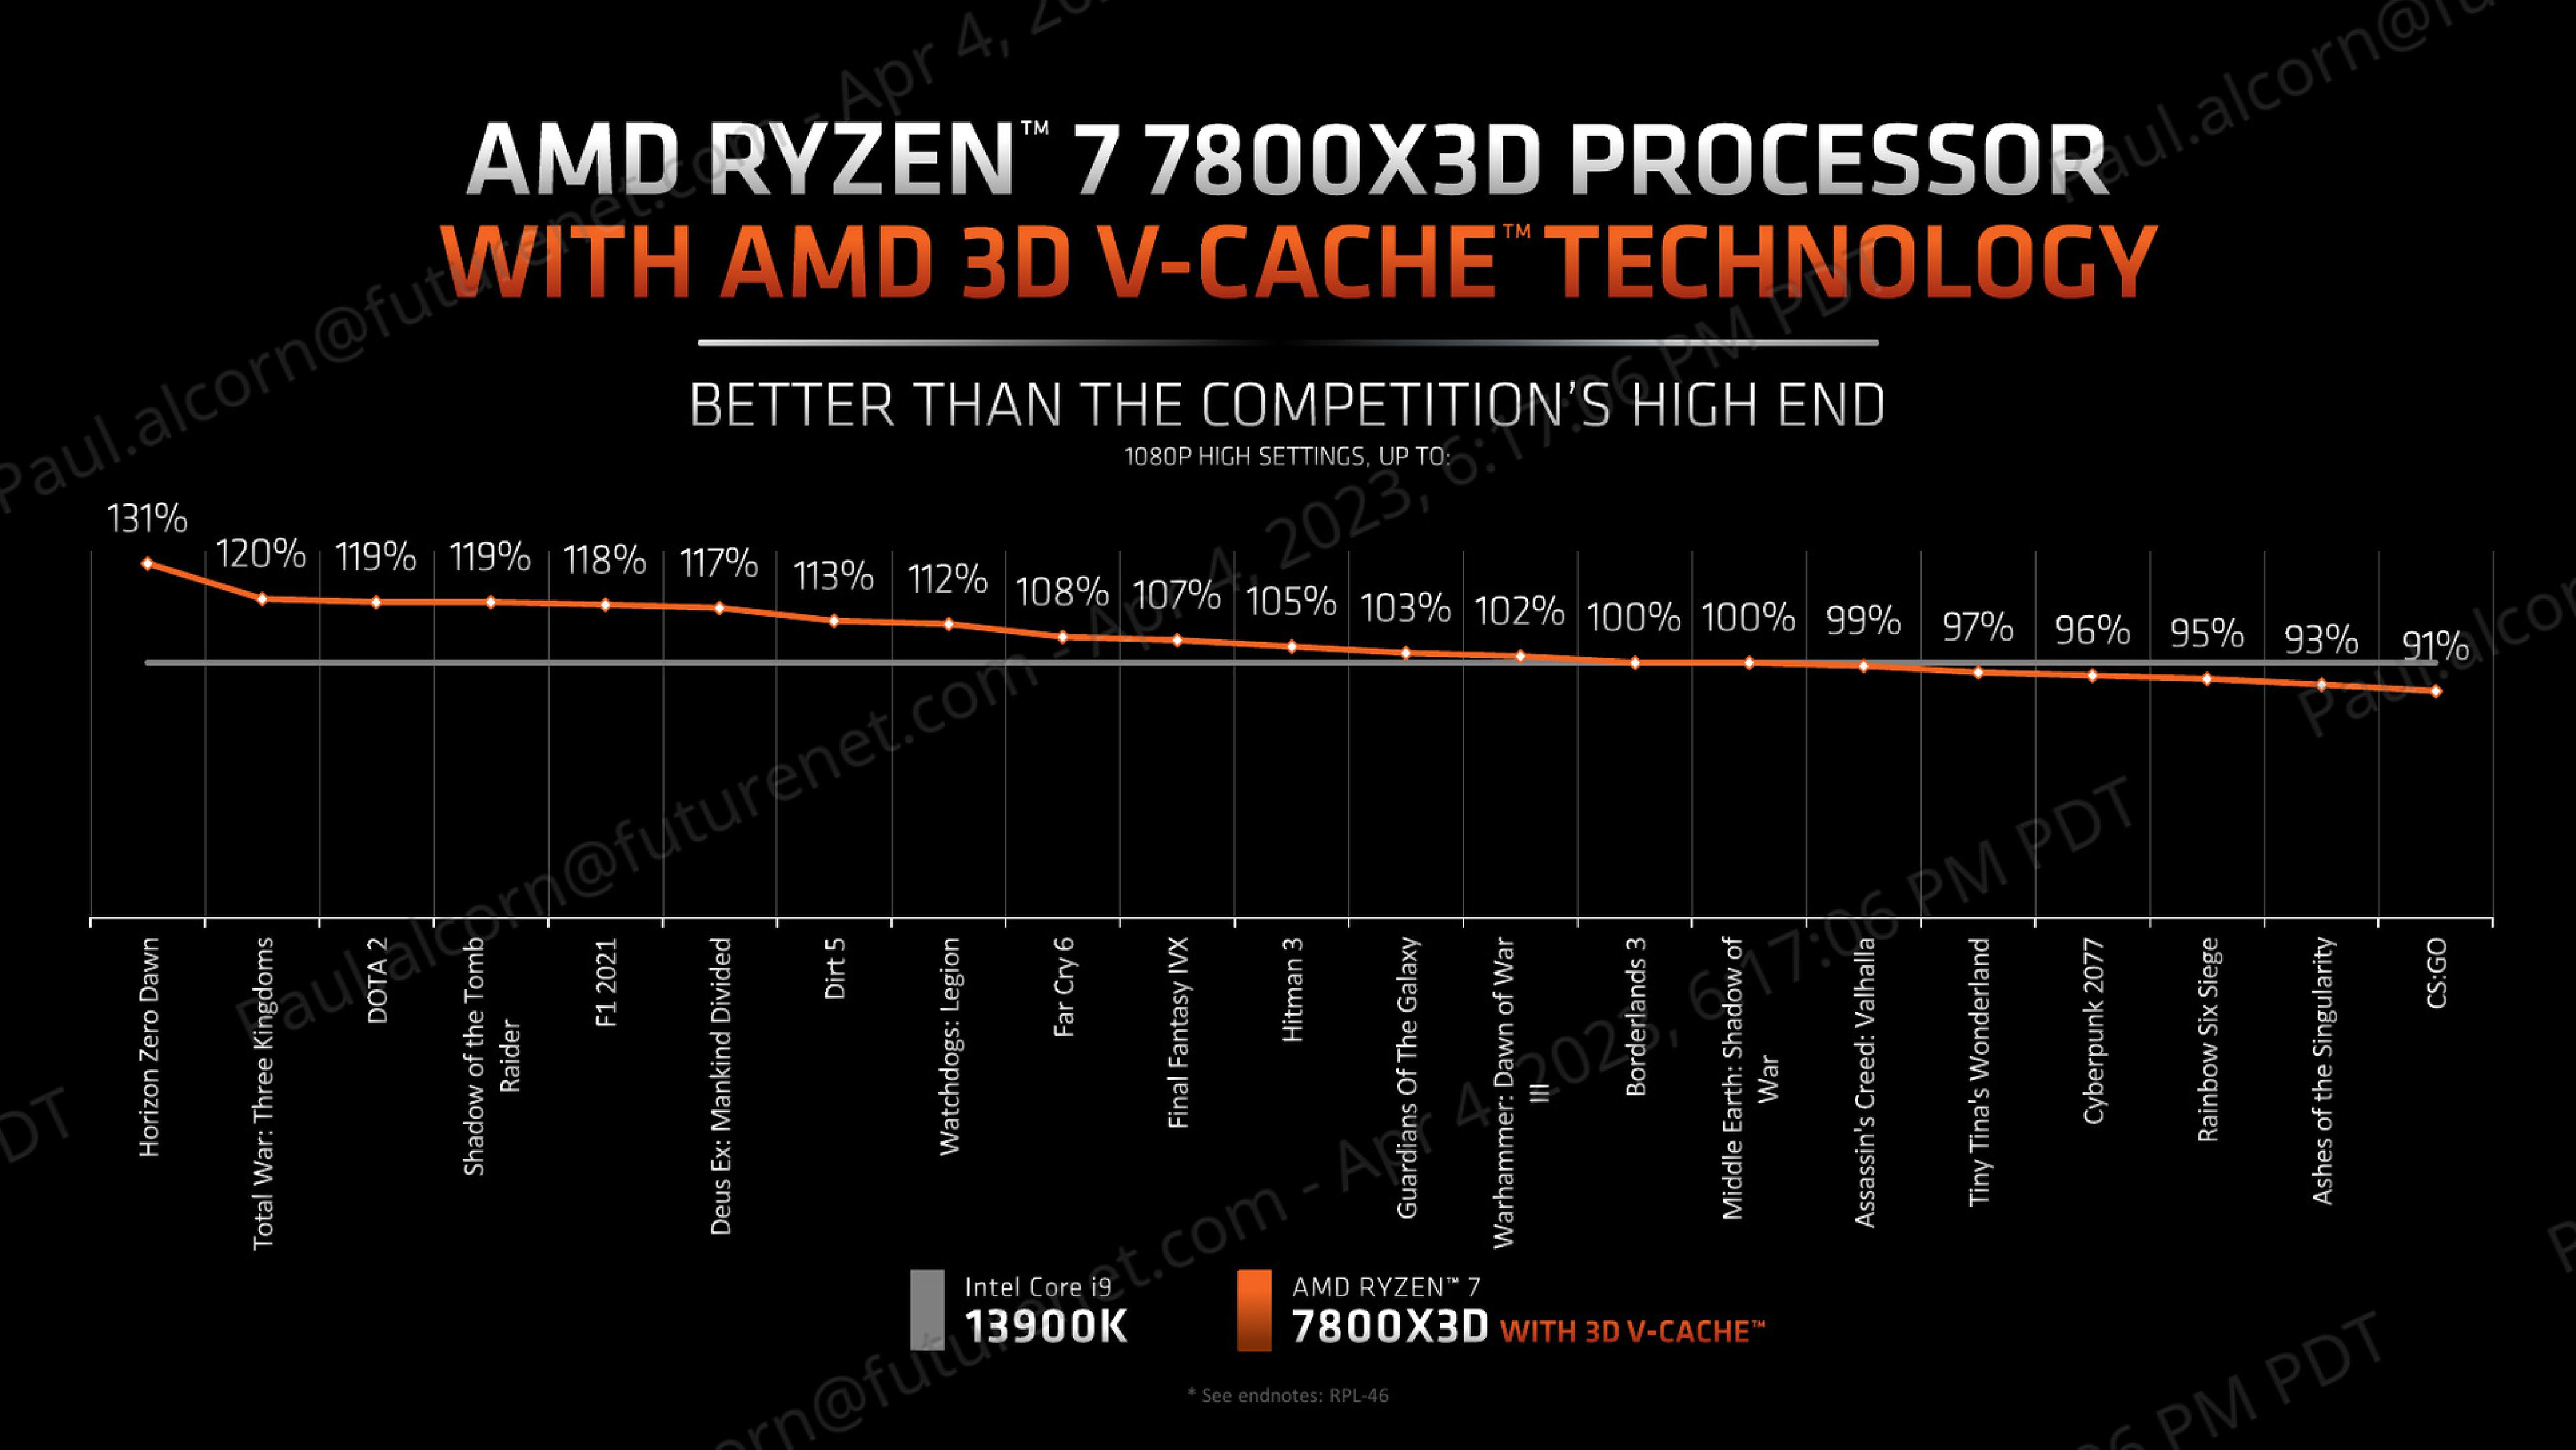 AMD Ryzen 9 7950X3D Desktop CPU review: New gaming flagship with 3D V-Cache  on AM5 socket -  Reviews